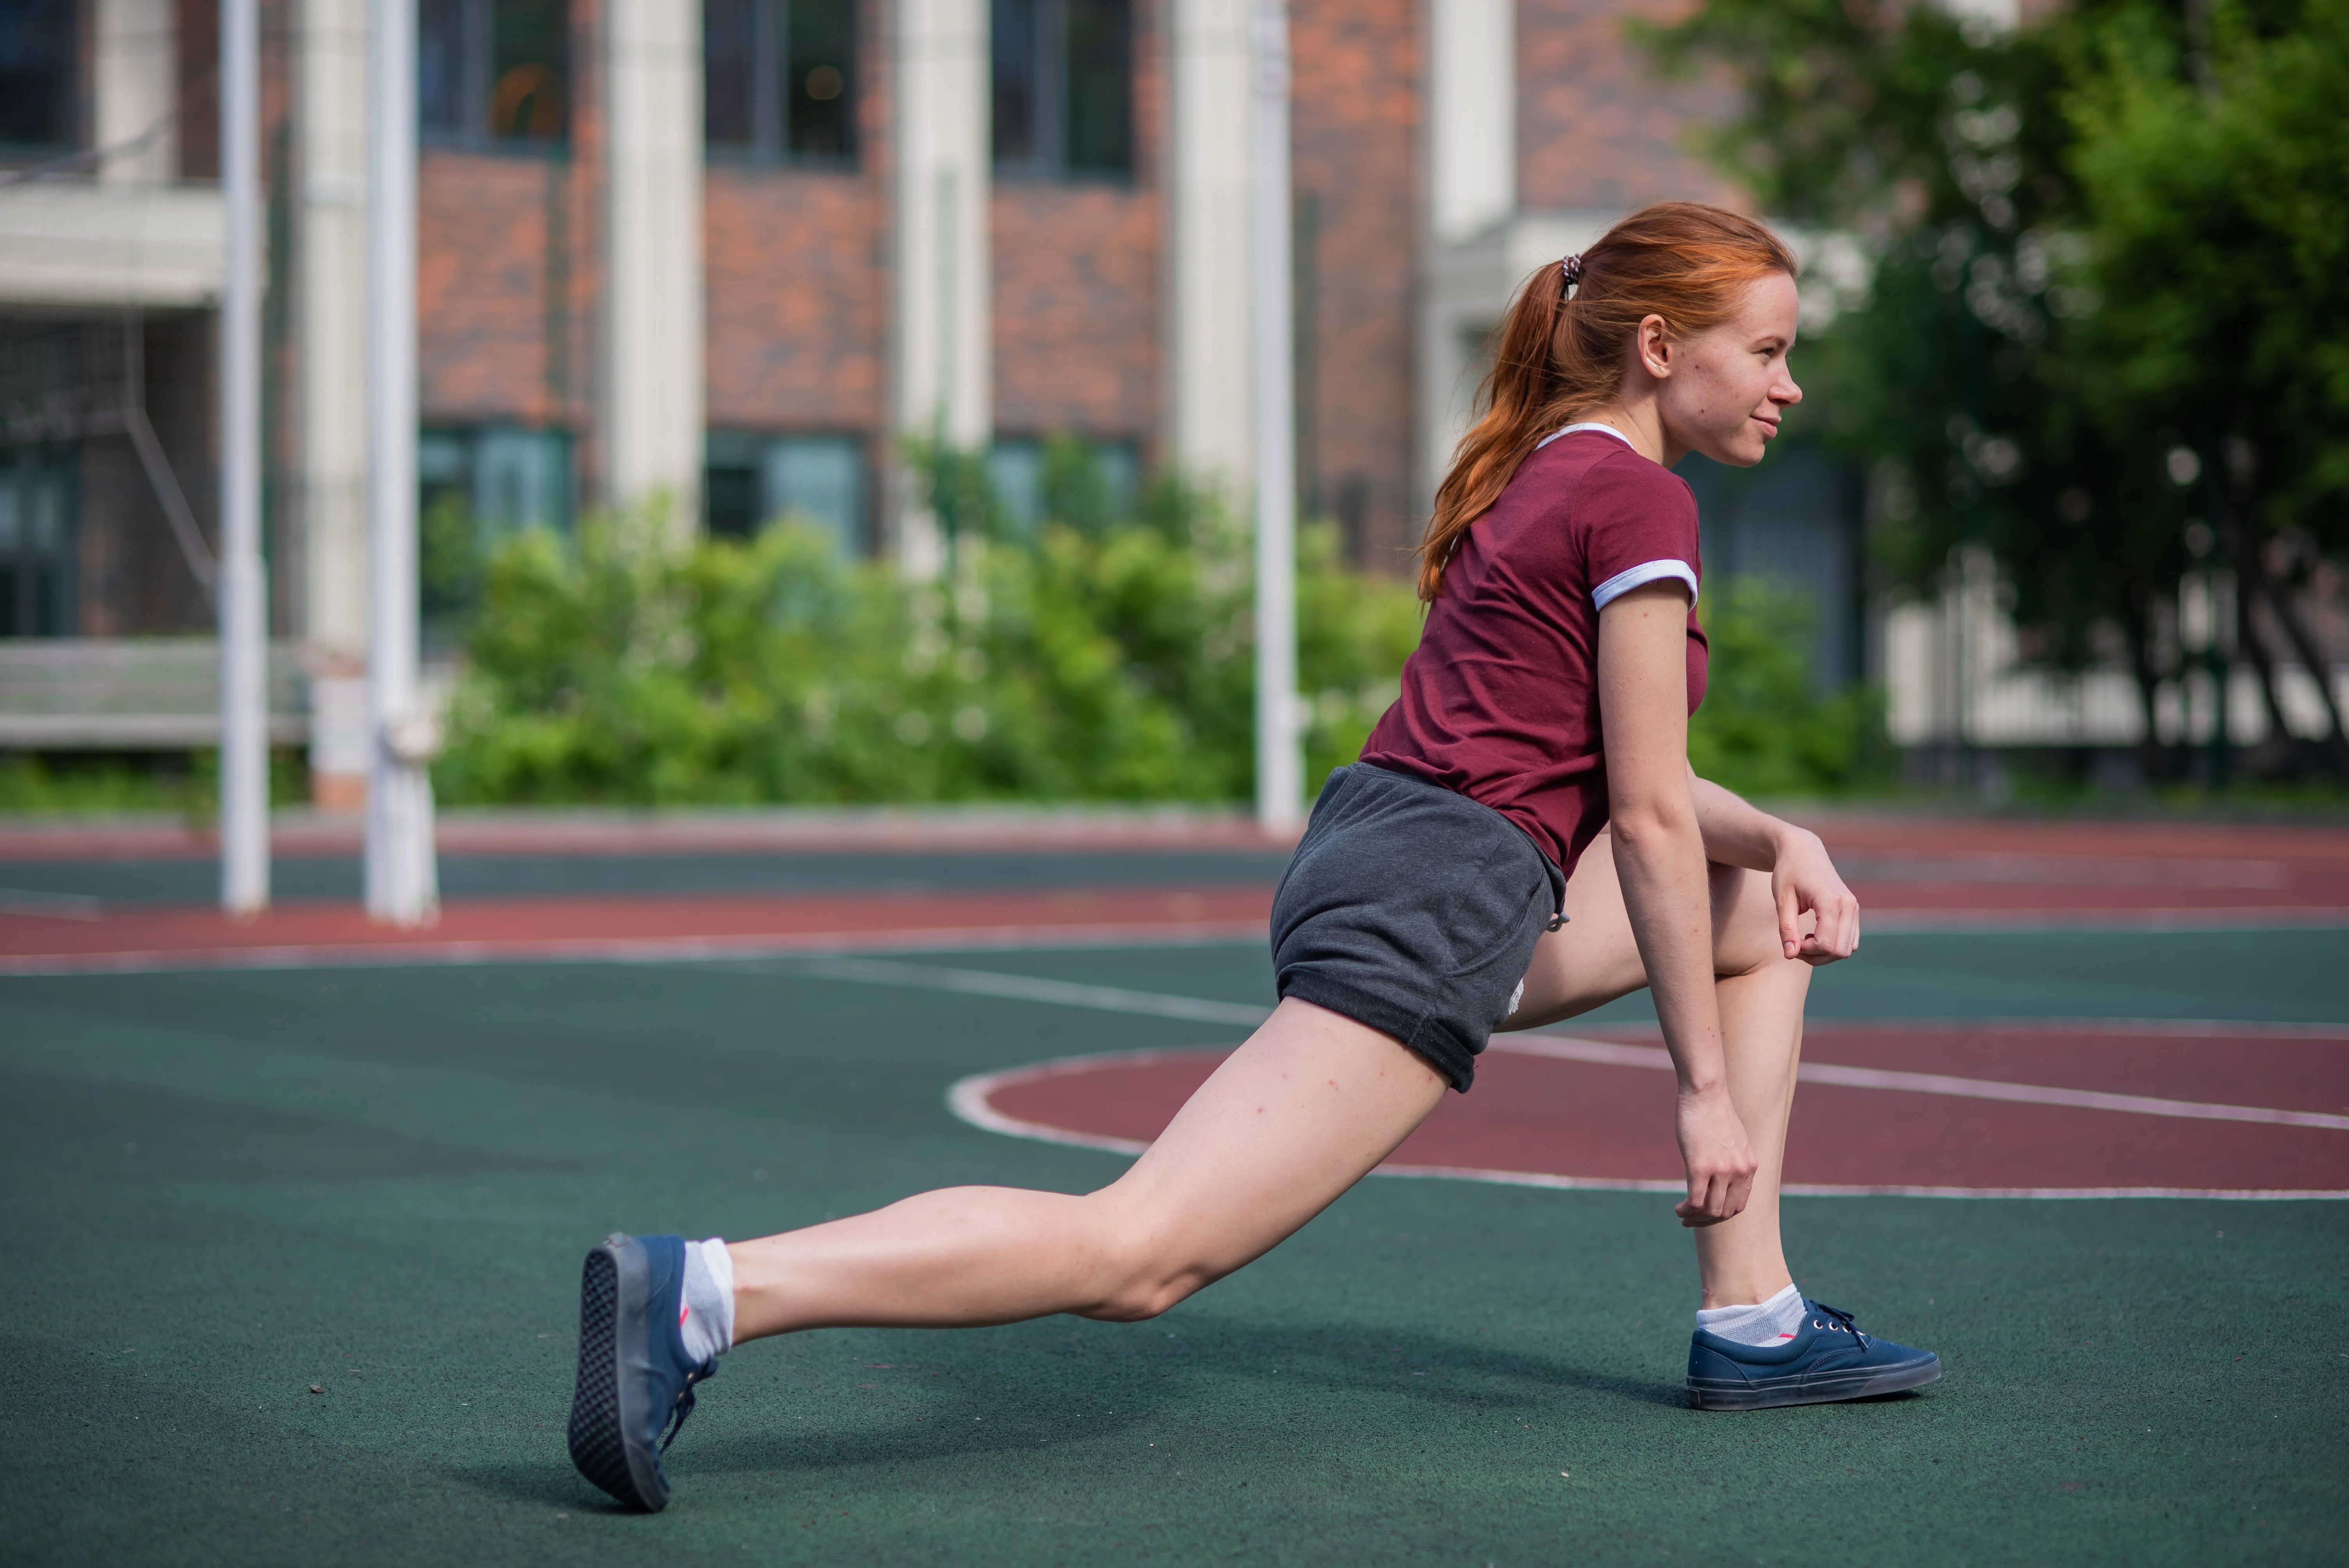 Girl in a lunge position on a basketball field